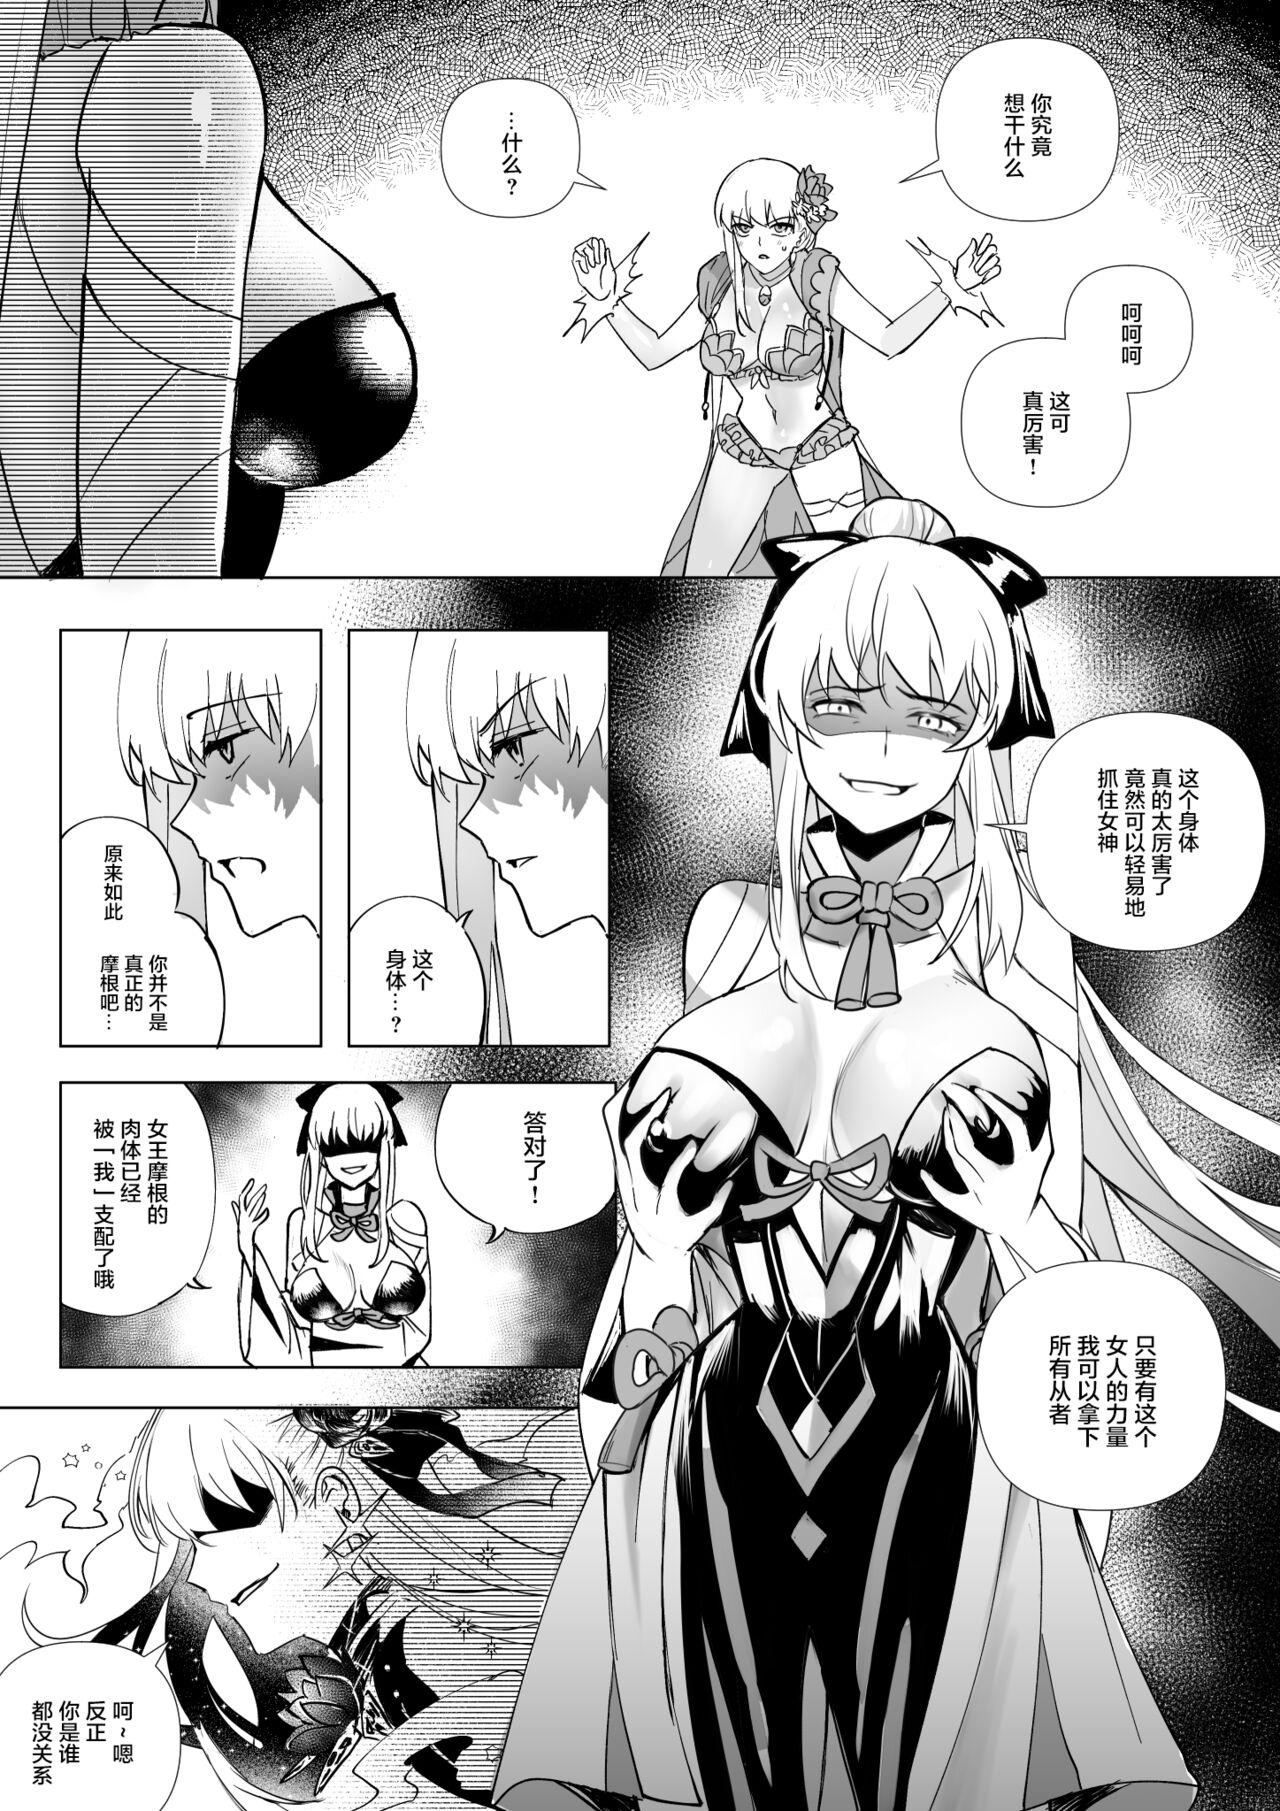 Family Roleplay FGO モルガン&水着カーマ憑依 - Fate grand order Leaked - Page 6